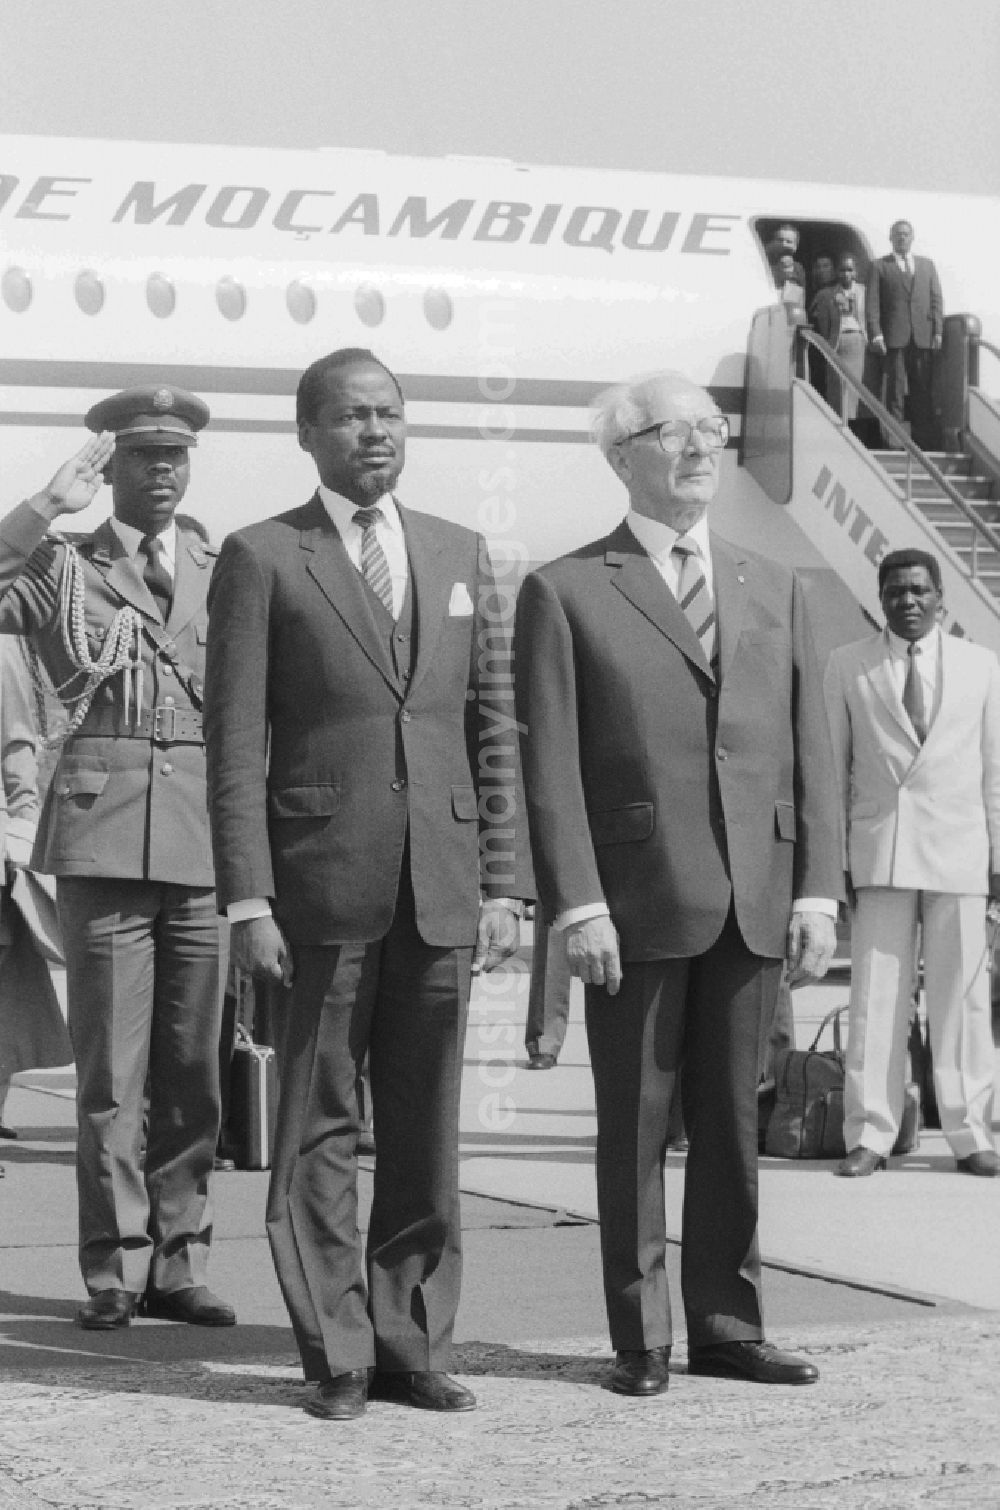 Schönefeld: State visit to Mozambique on arrival at Schoenefeld airport in the state of Brandenburg in the territory of the former GDR, German Democratic Republic. Erich Honecker greets President Joaquim Alberto Chissano with military honors at the gangway of the plane